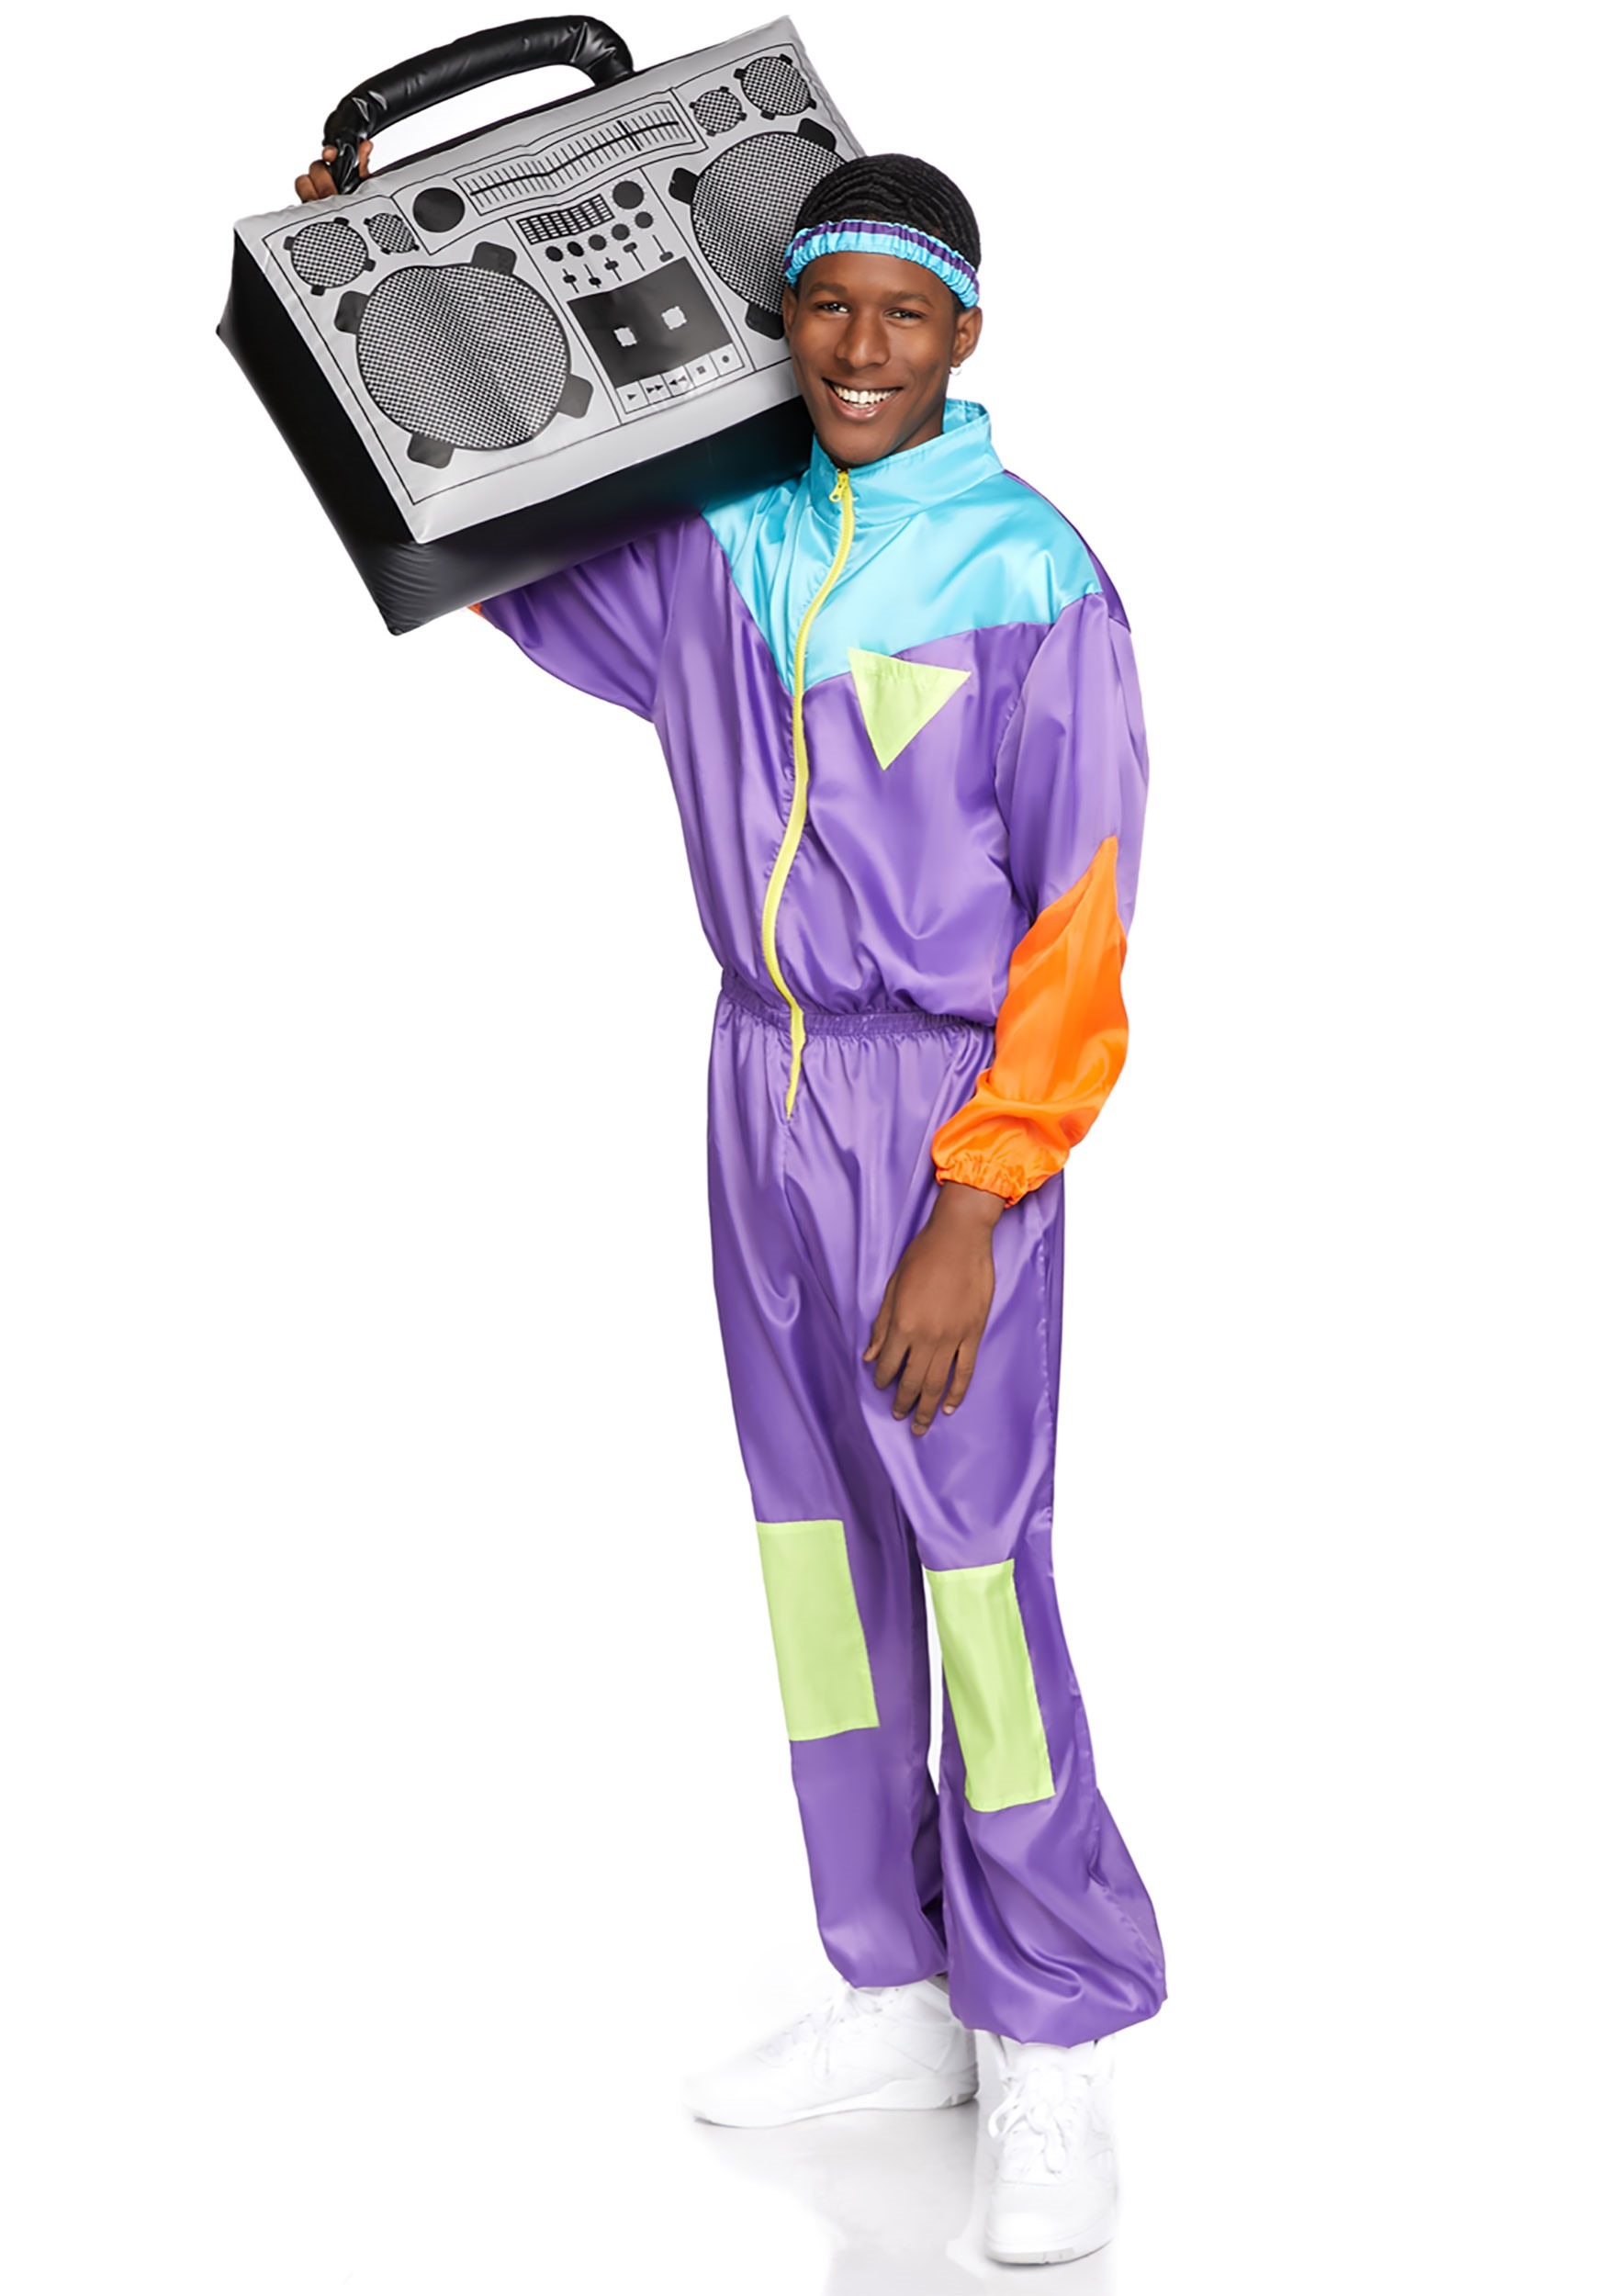 Awesome 80s Track Suit Costume for Men